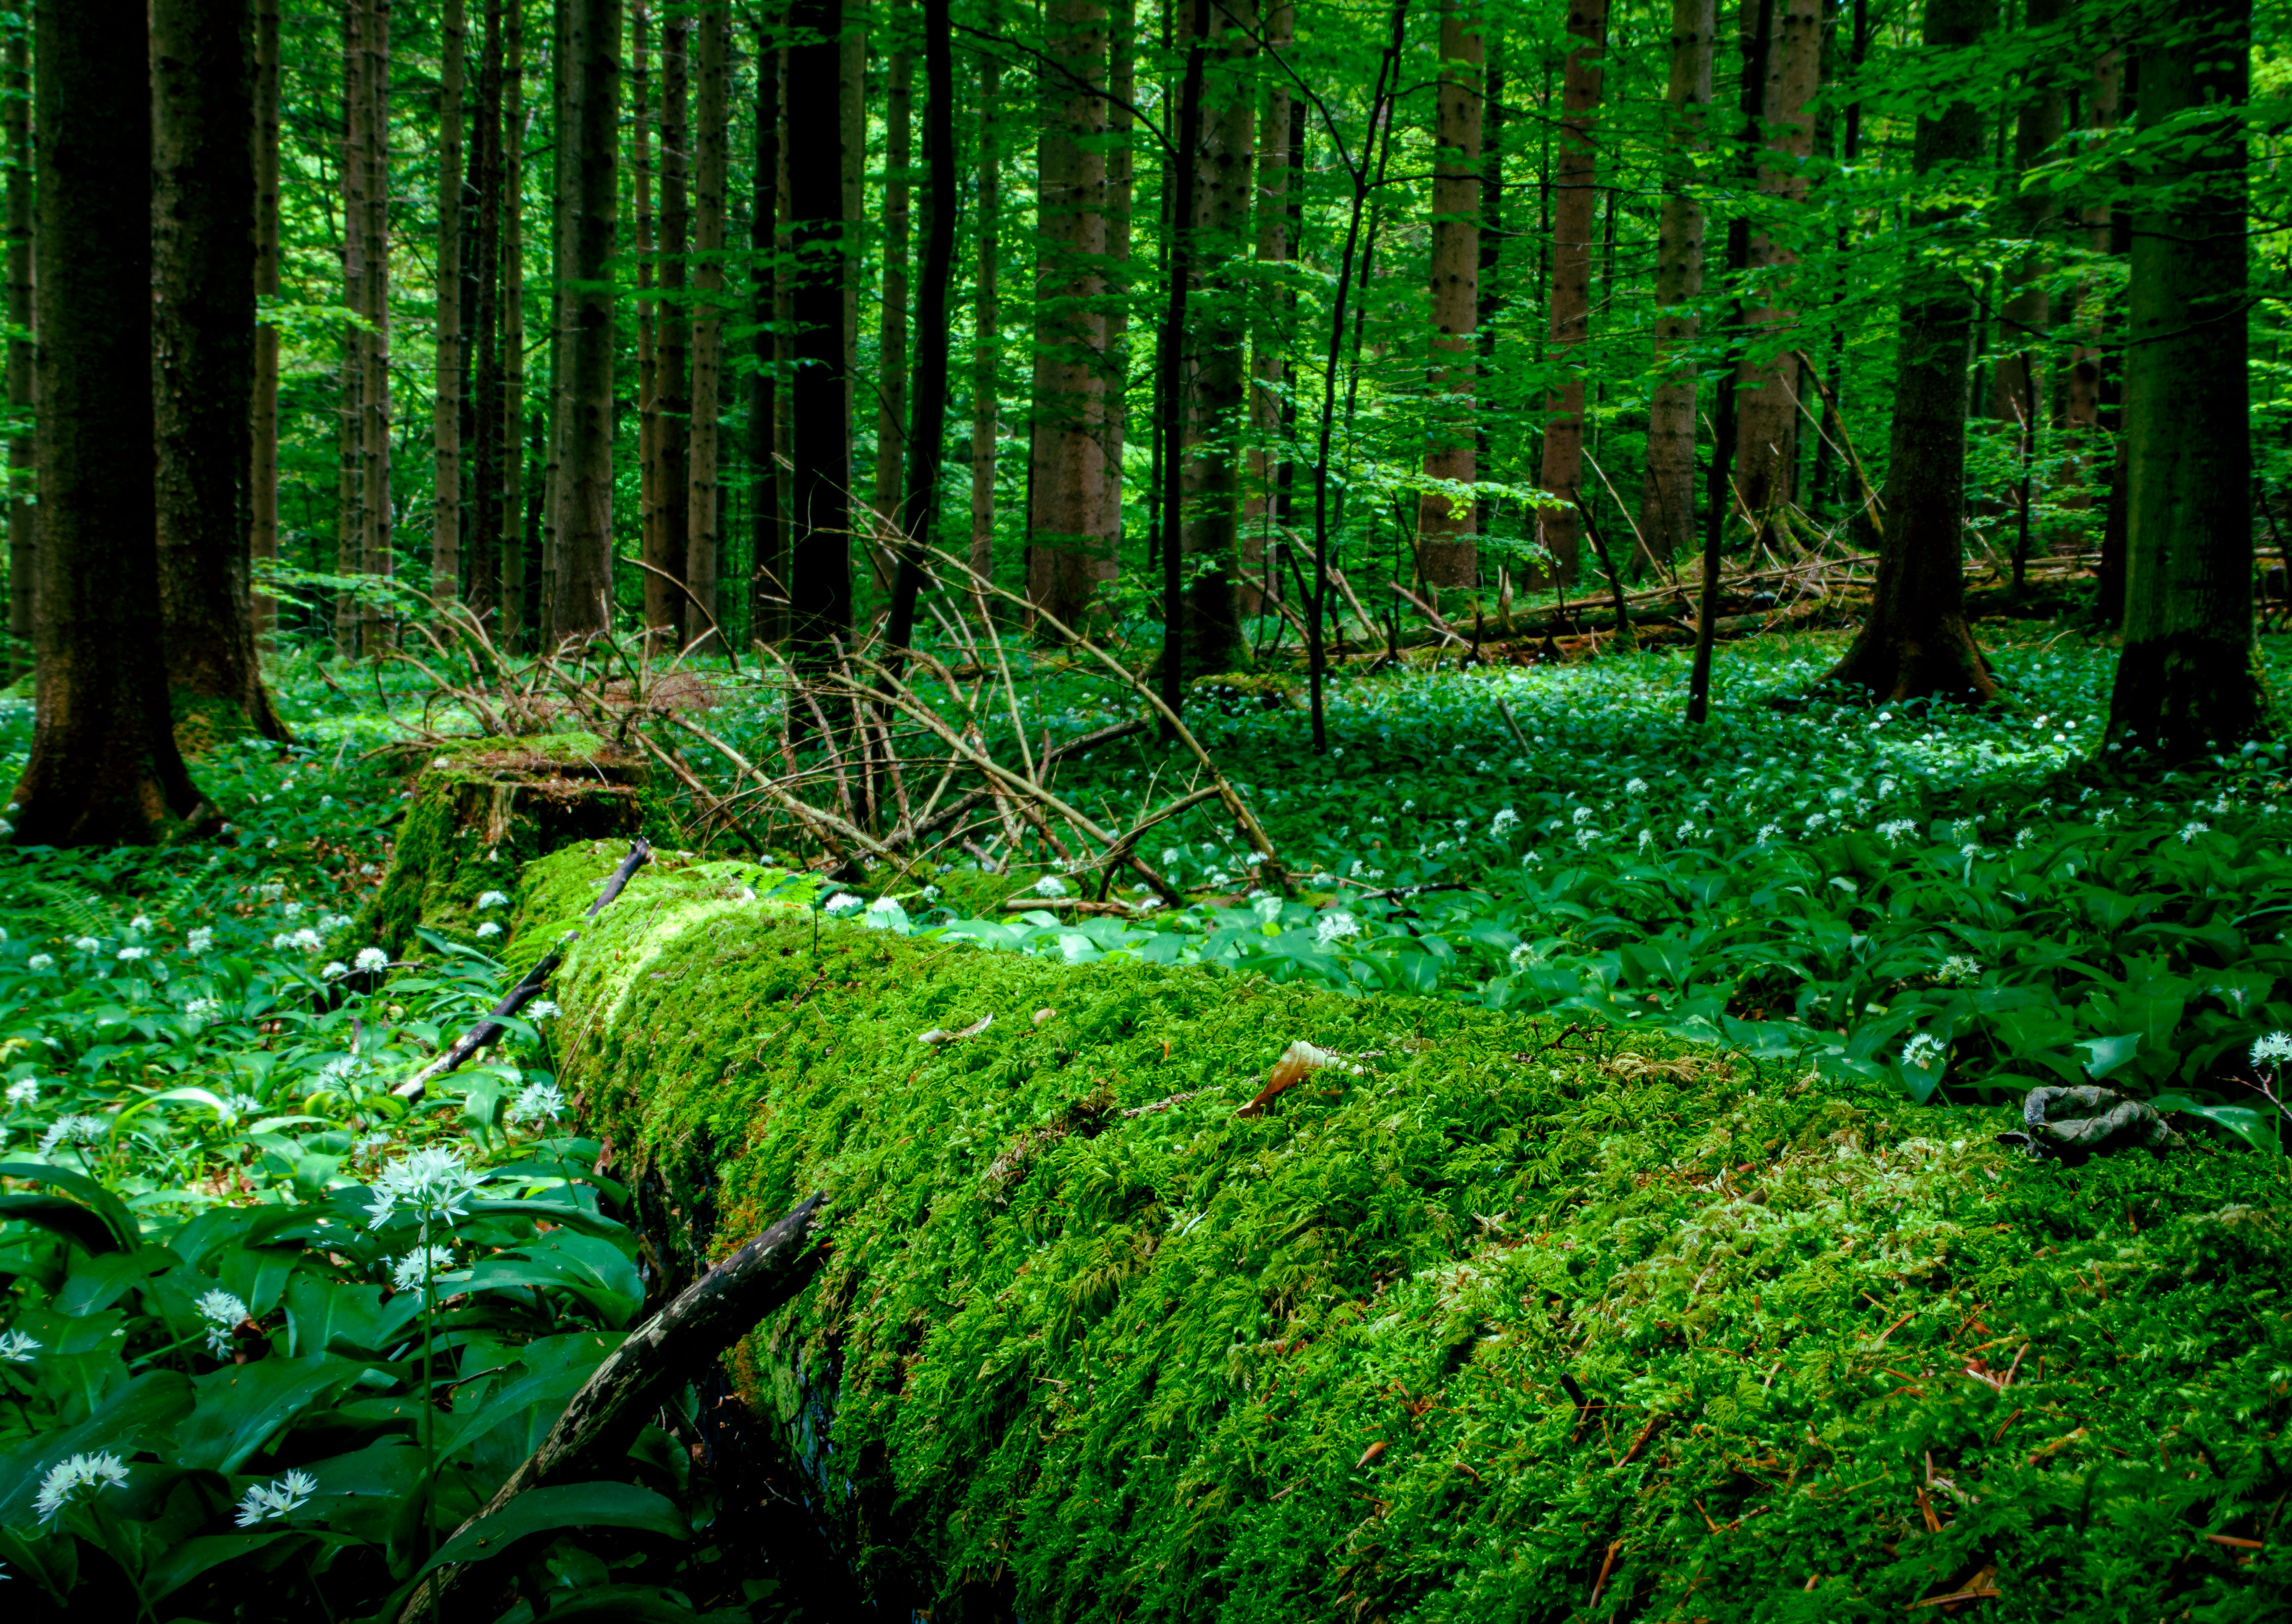 Releax in the green forest